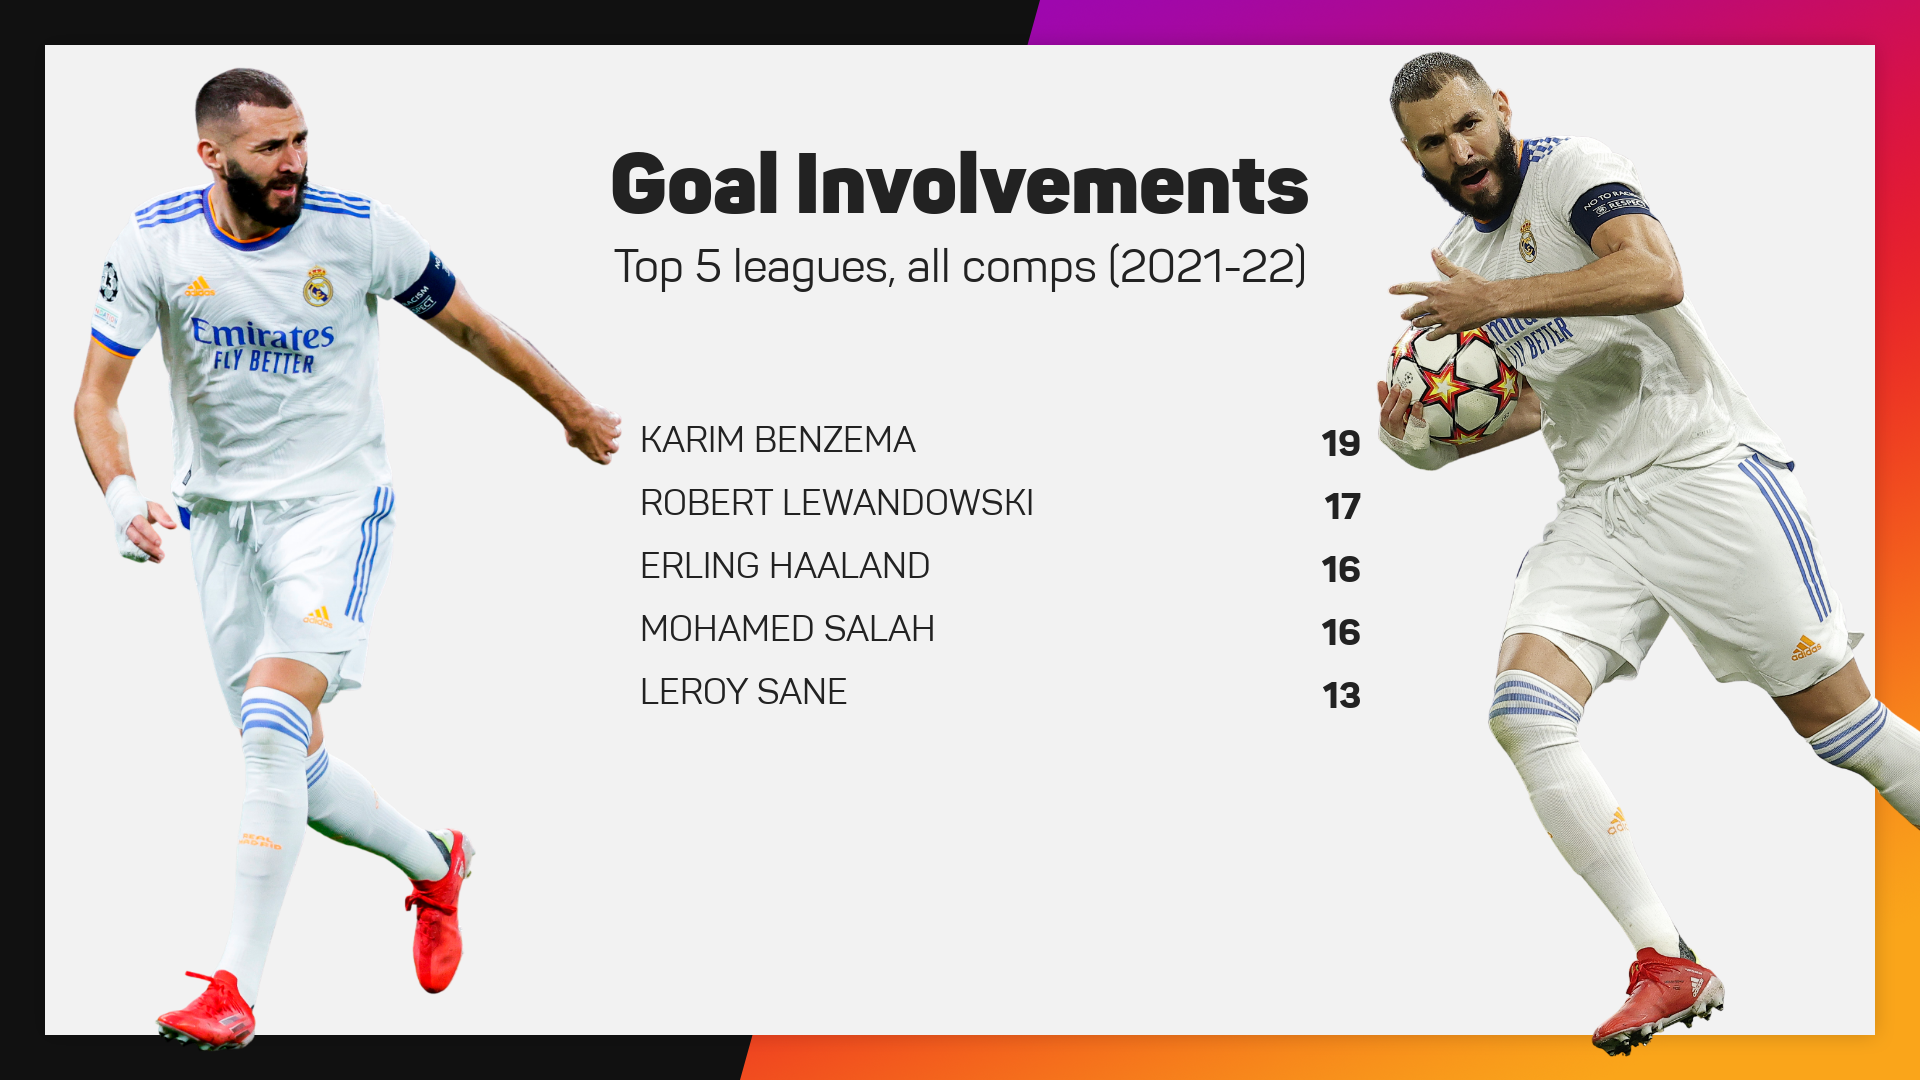 Karim Benzema has more goal involvements than anyone else in Europe's top five leagues this season